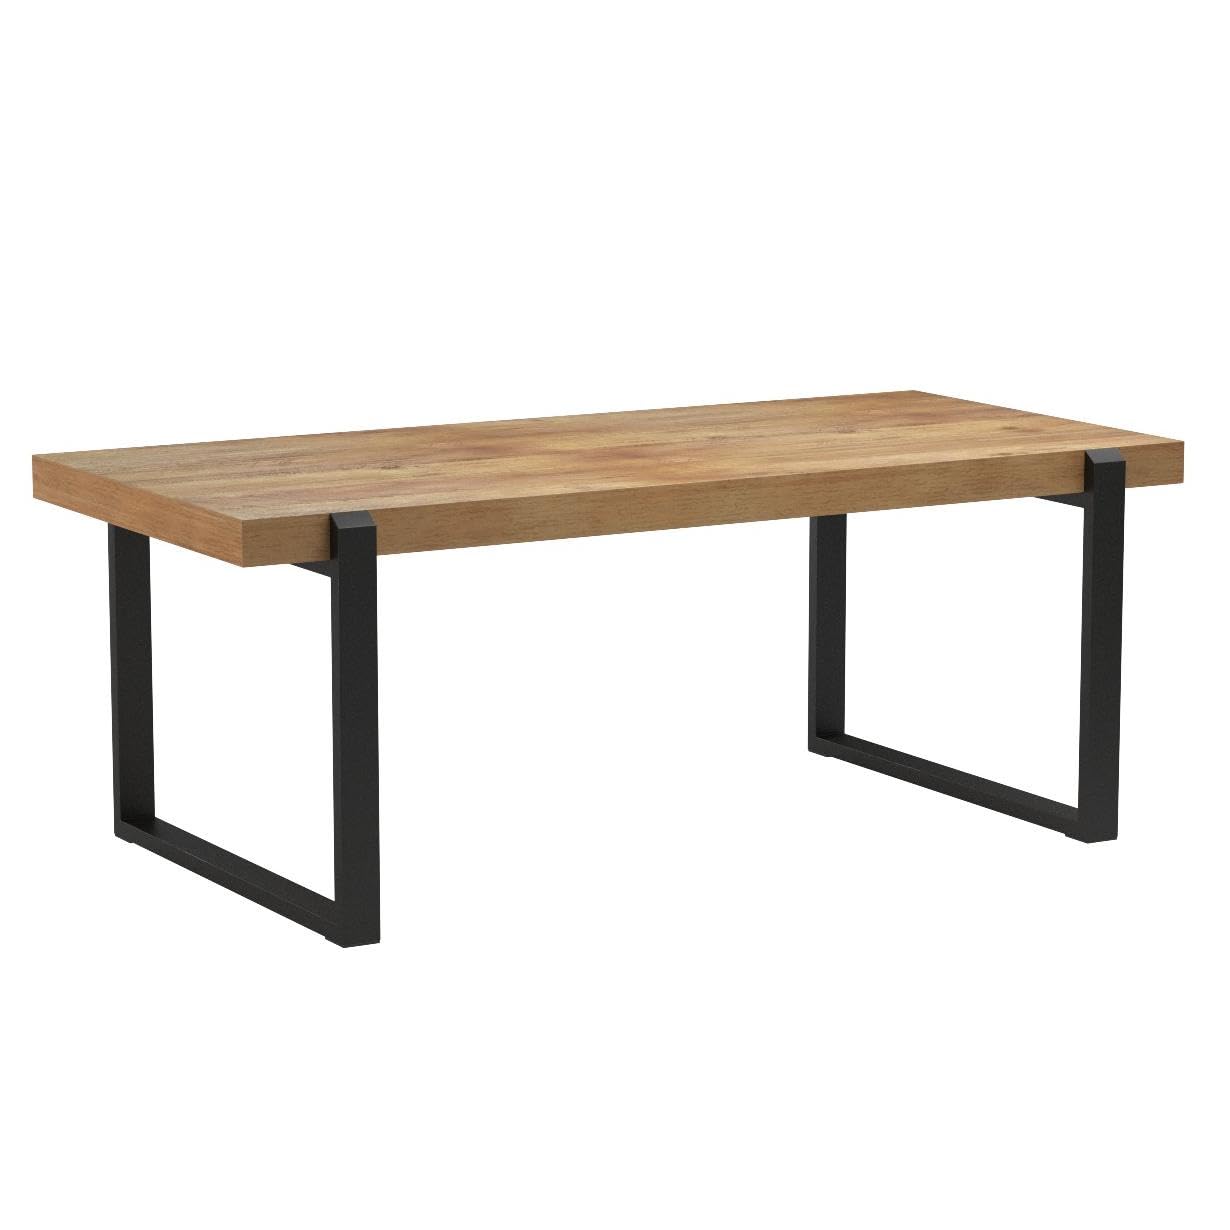 FOLUBAN Rustic Coffee Table,Wood and Metal Industrial Cocktail Table for Living Room, 47 Inch Oak